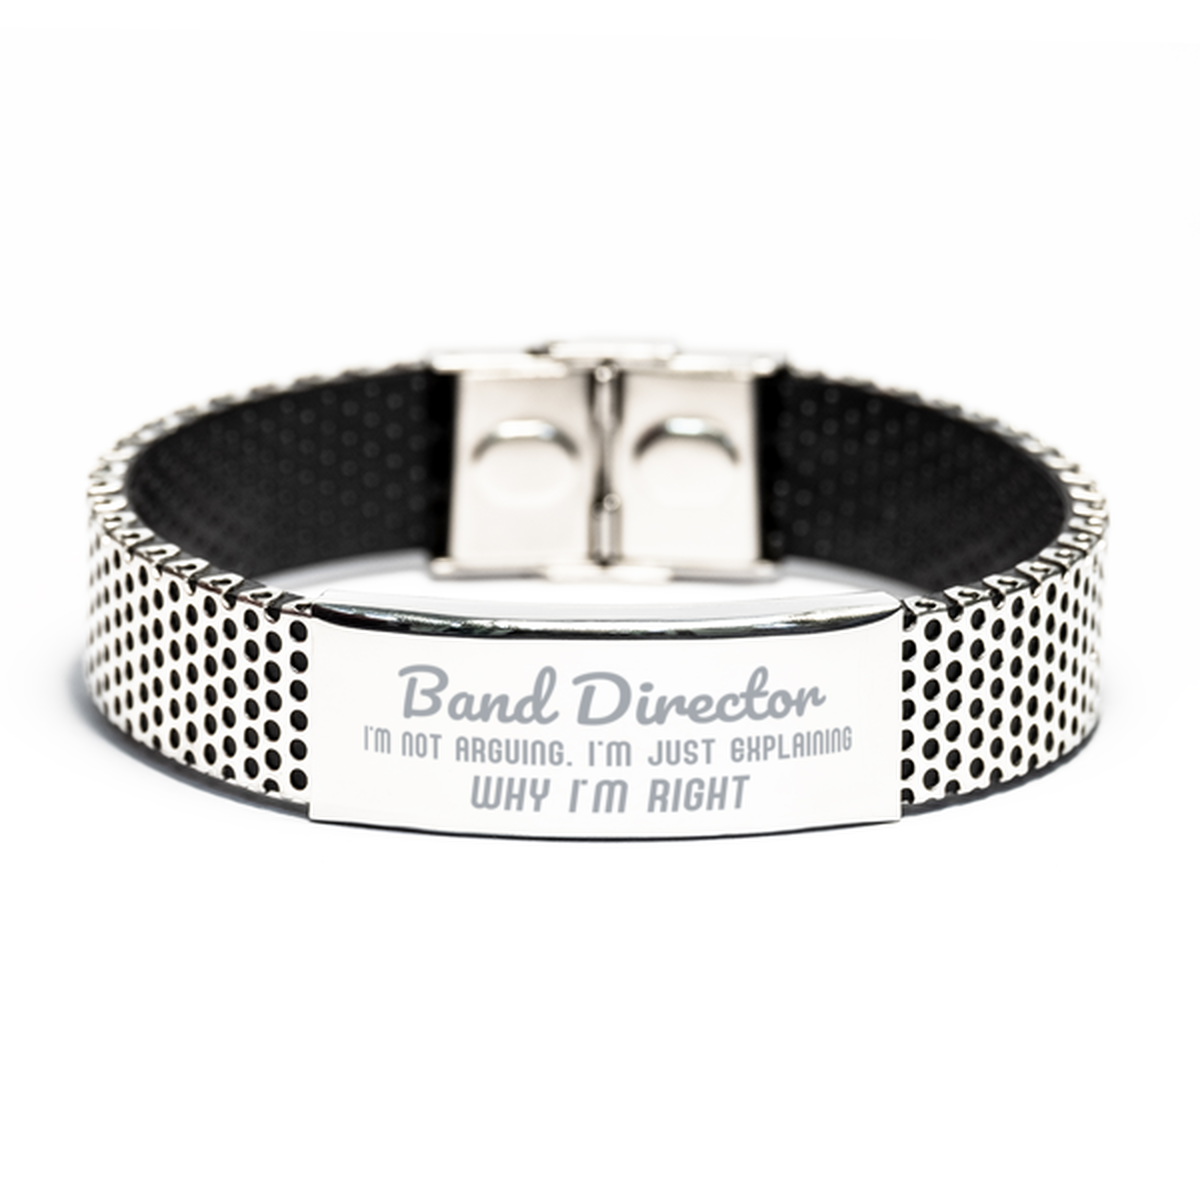 Band Director I'm not Arguing. I'm Just Explaining Why I'm RIGHT Stainless Steel Bracelet, Funny Saying Quote Band Director Gifts For Band Director Graduation Birthday Christmas Gifts for Men Women Coworker